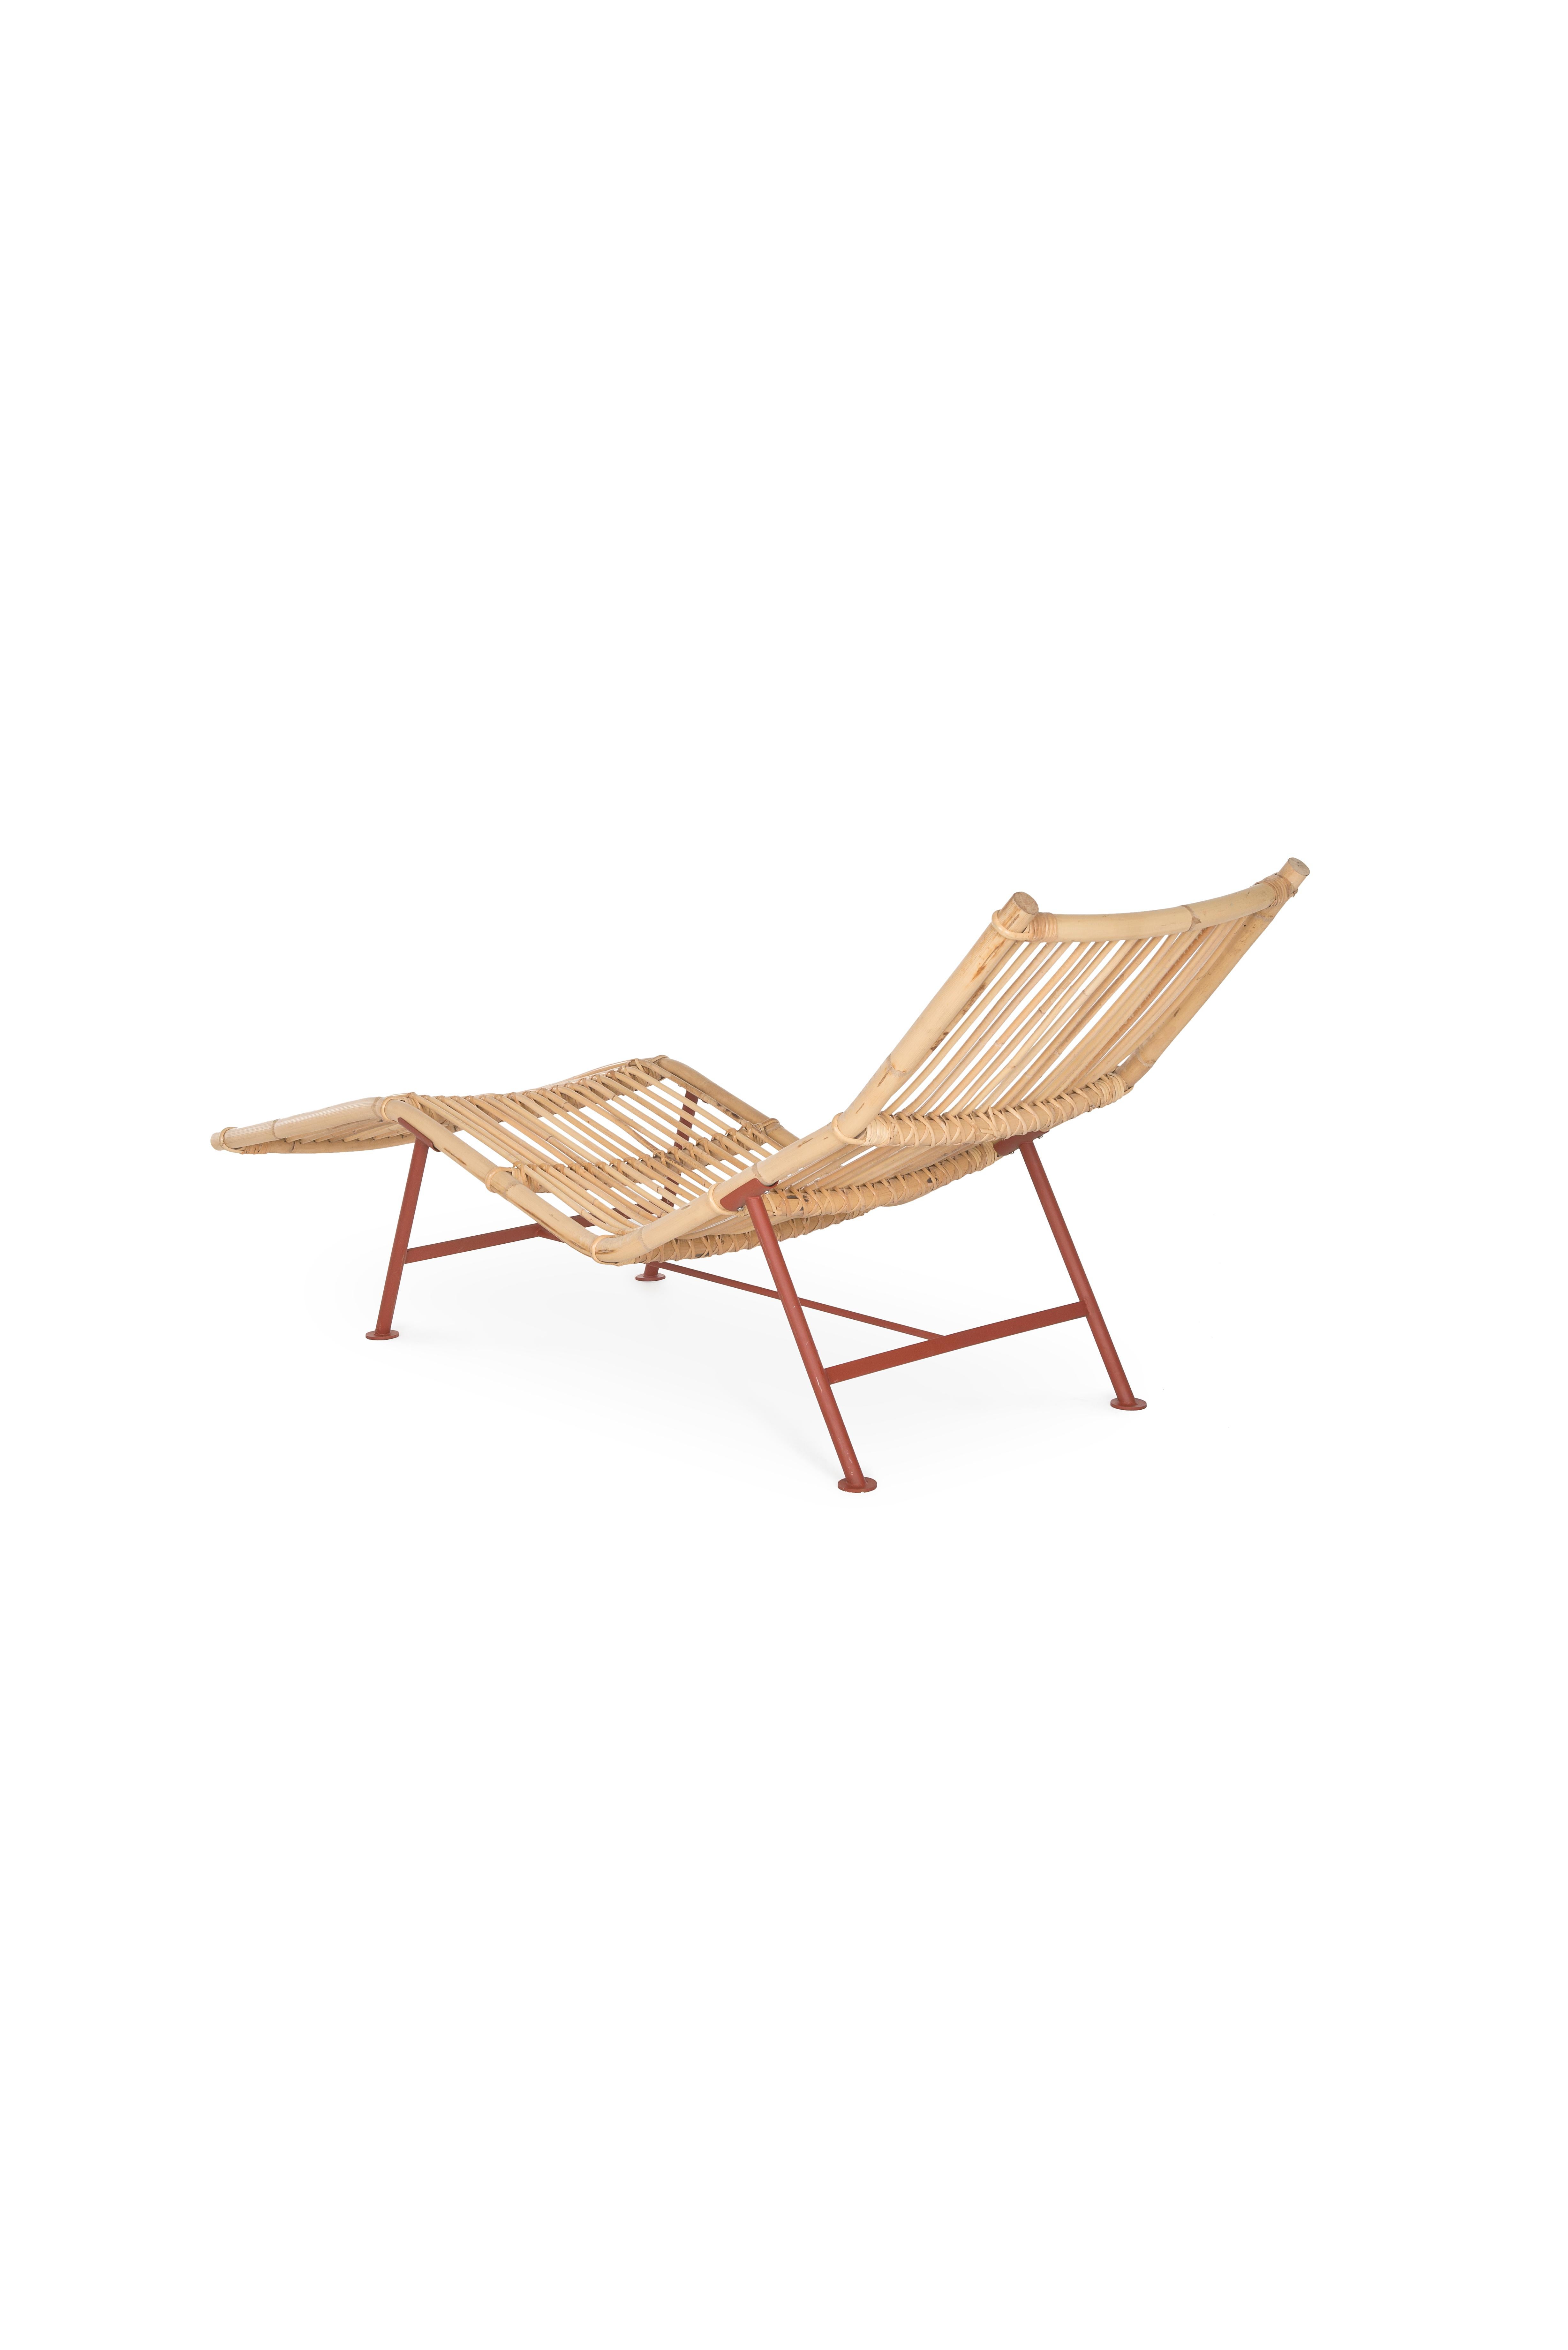 Lensvelt Cane Divan Lounge Chair In New Condition For Sale In Amsterdam, NL